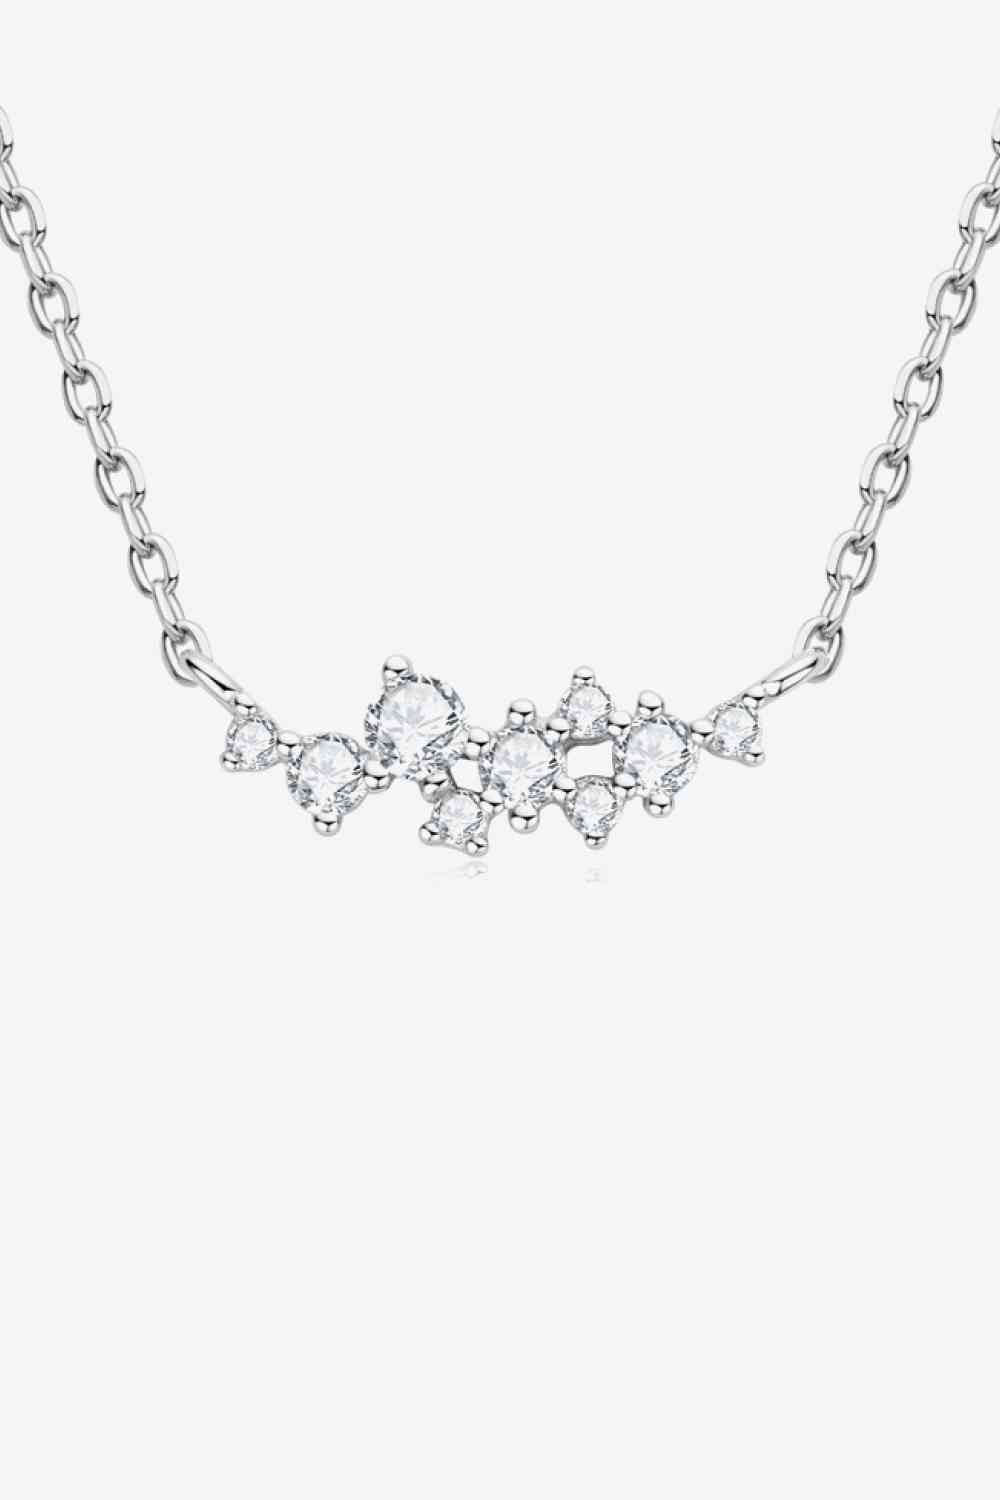 Adored Get A Move On Moissanite Pendant Chain Necklace - Kings Crown Jewel Boutique